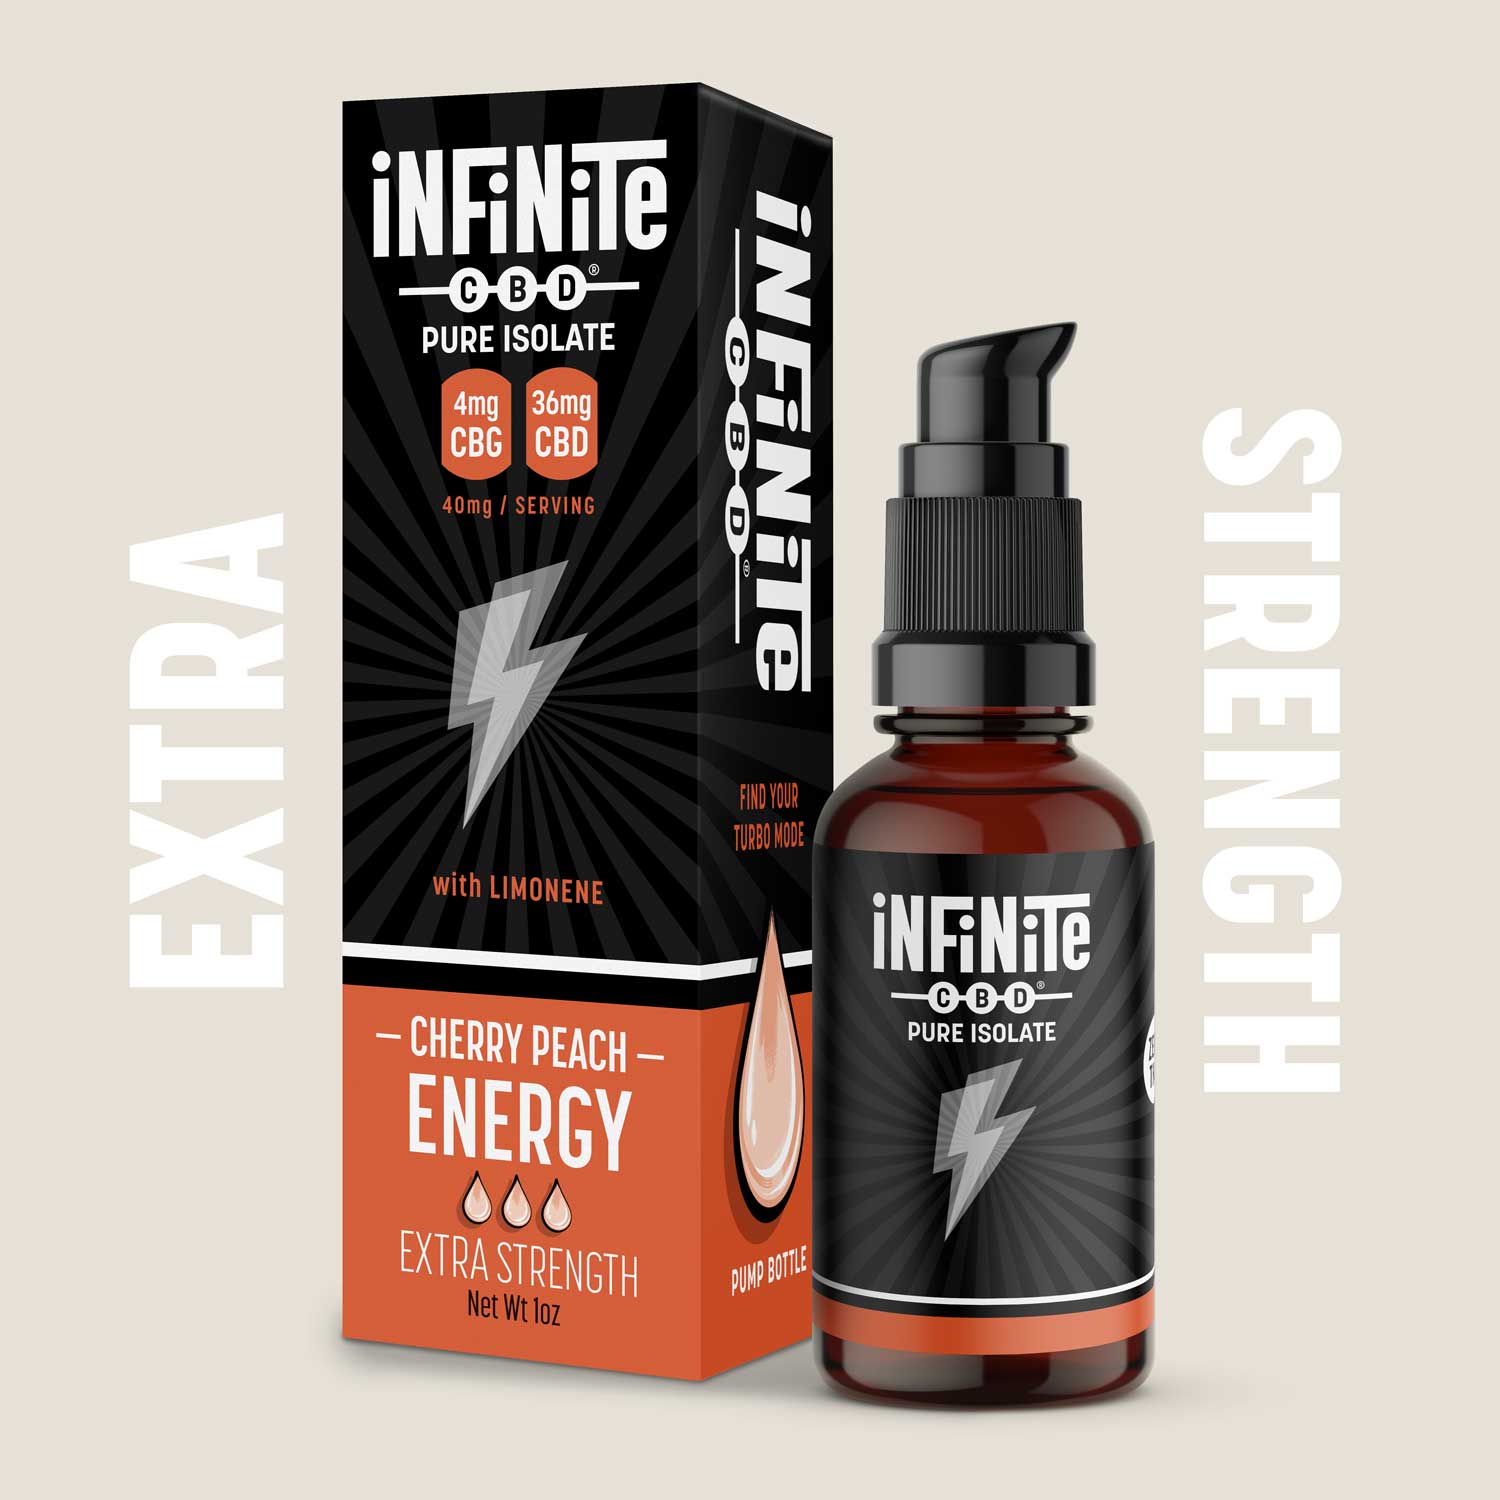 Tinctures<br>Formulation: Energy<br>CBD: Pure Isolate (Zero THC)<br>Strength: Extra (40mg/serving)